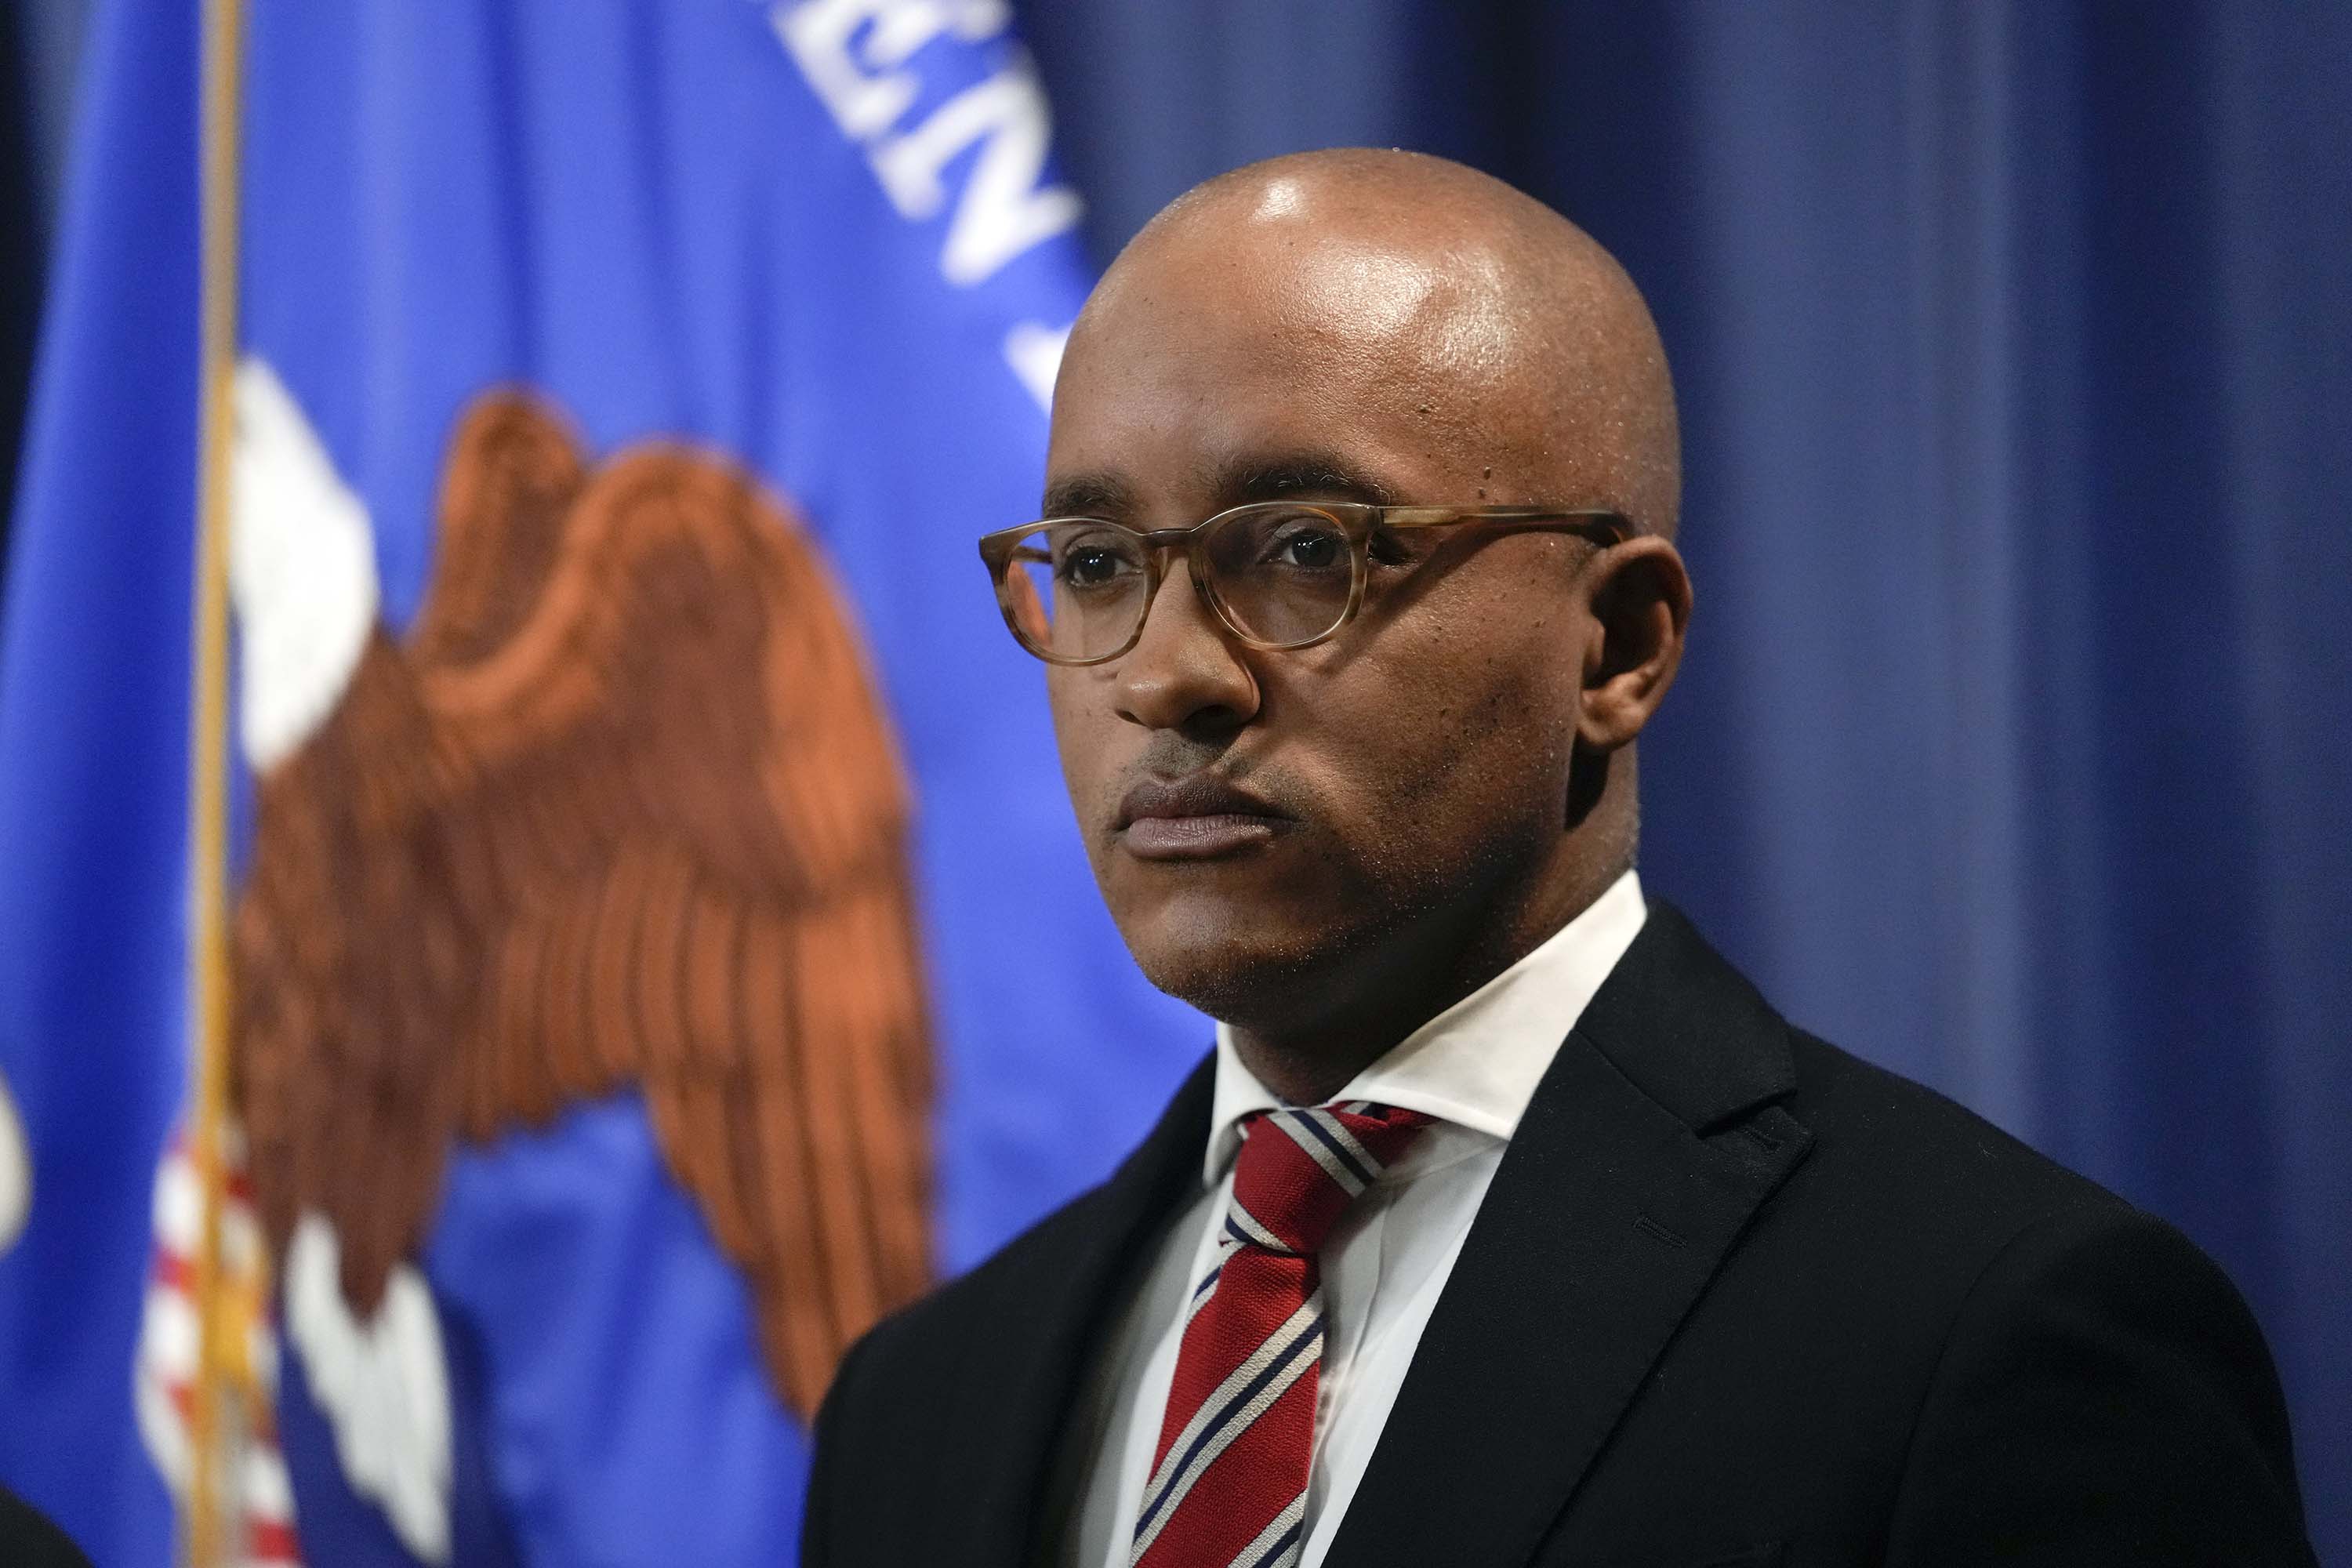 US Attorney Damian Williams, for the Southern District of New York, listens during a news conference at the Department of Justice in Washington, on January 27.